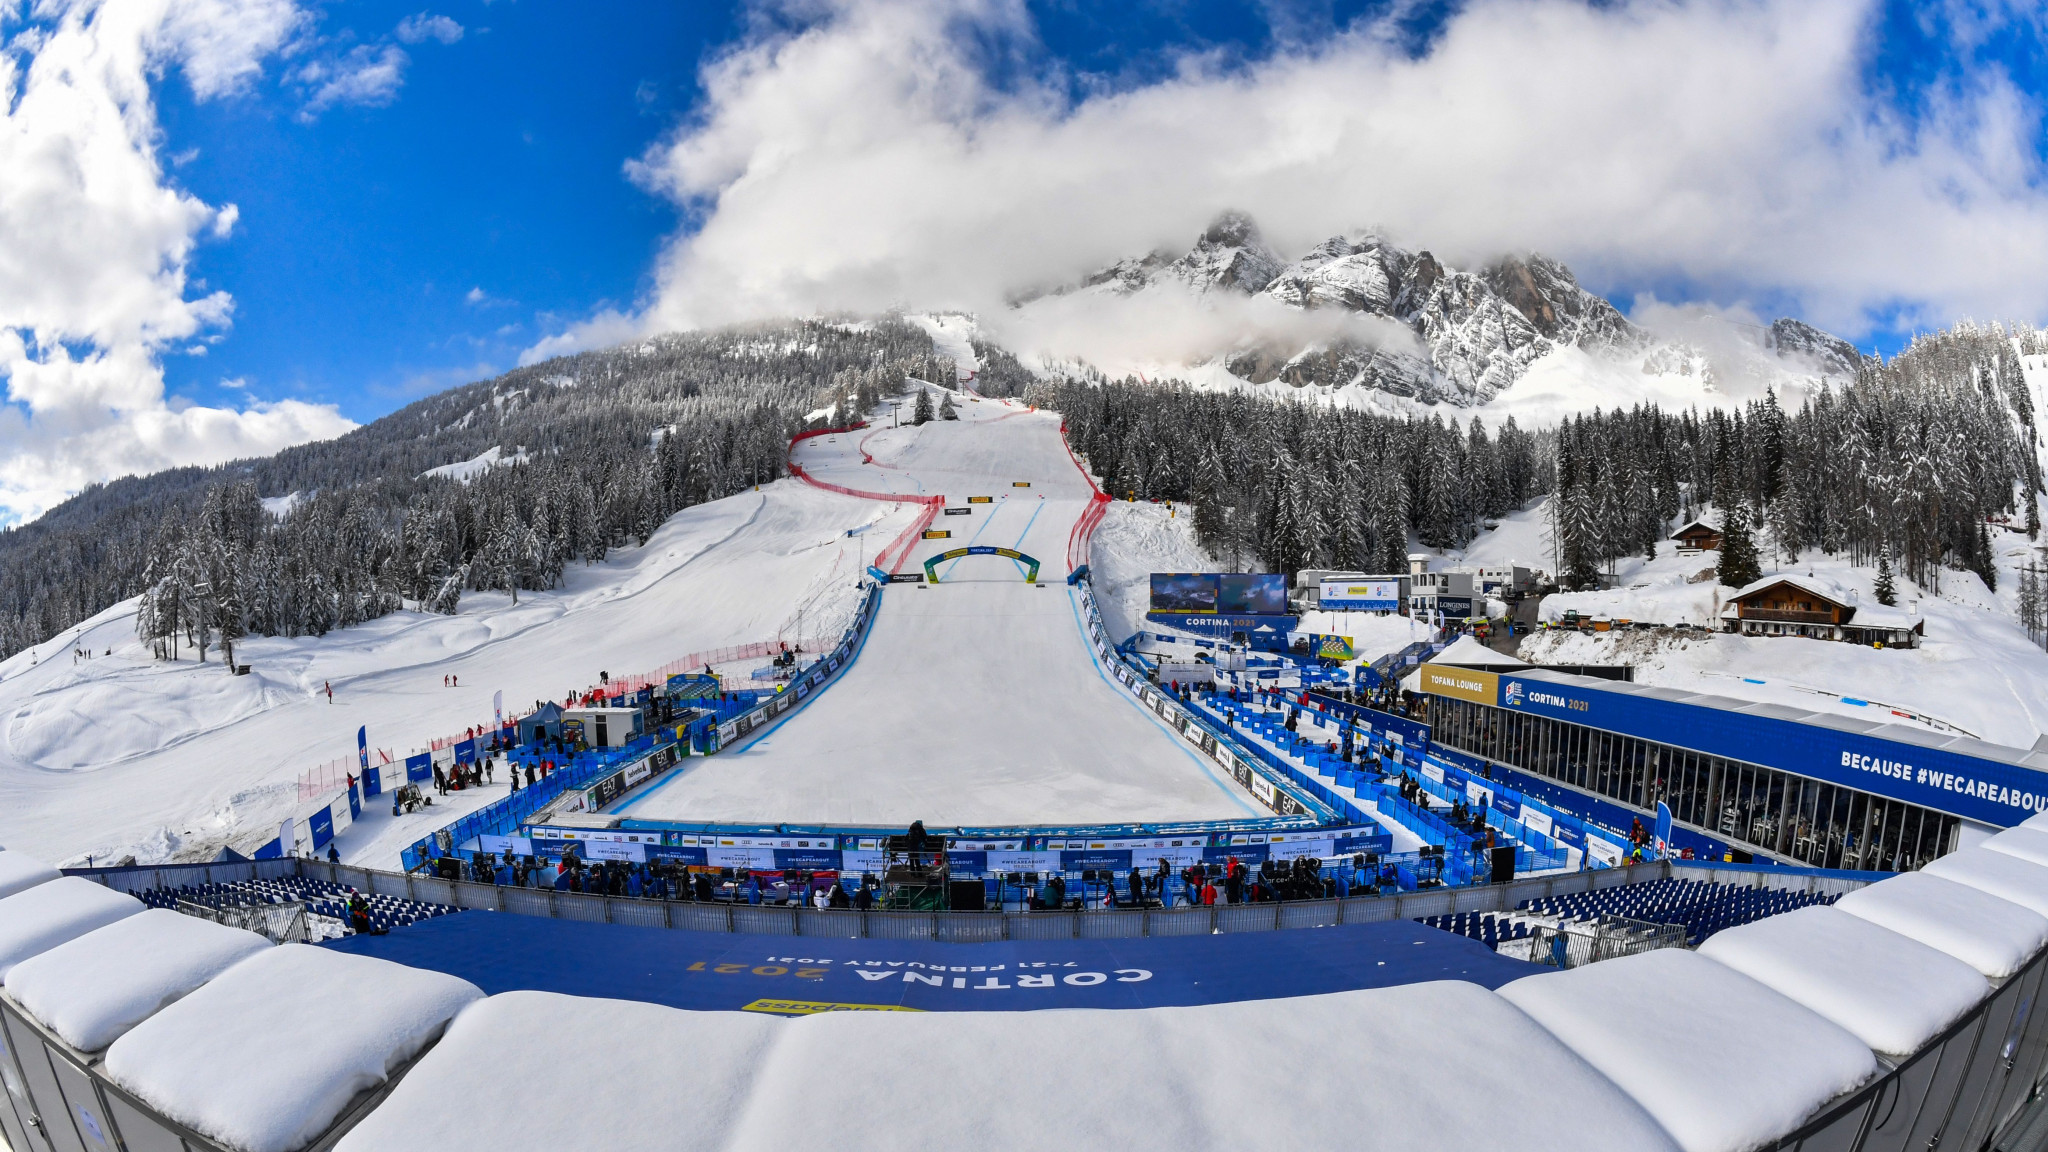 A masterplan for the Milan Cortina 2026 Winter Olympics is set to be published at the end of the year ©Getty Images